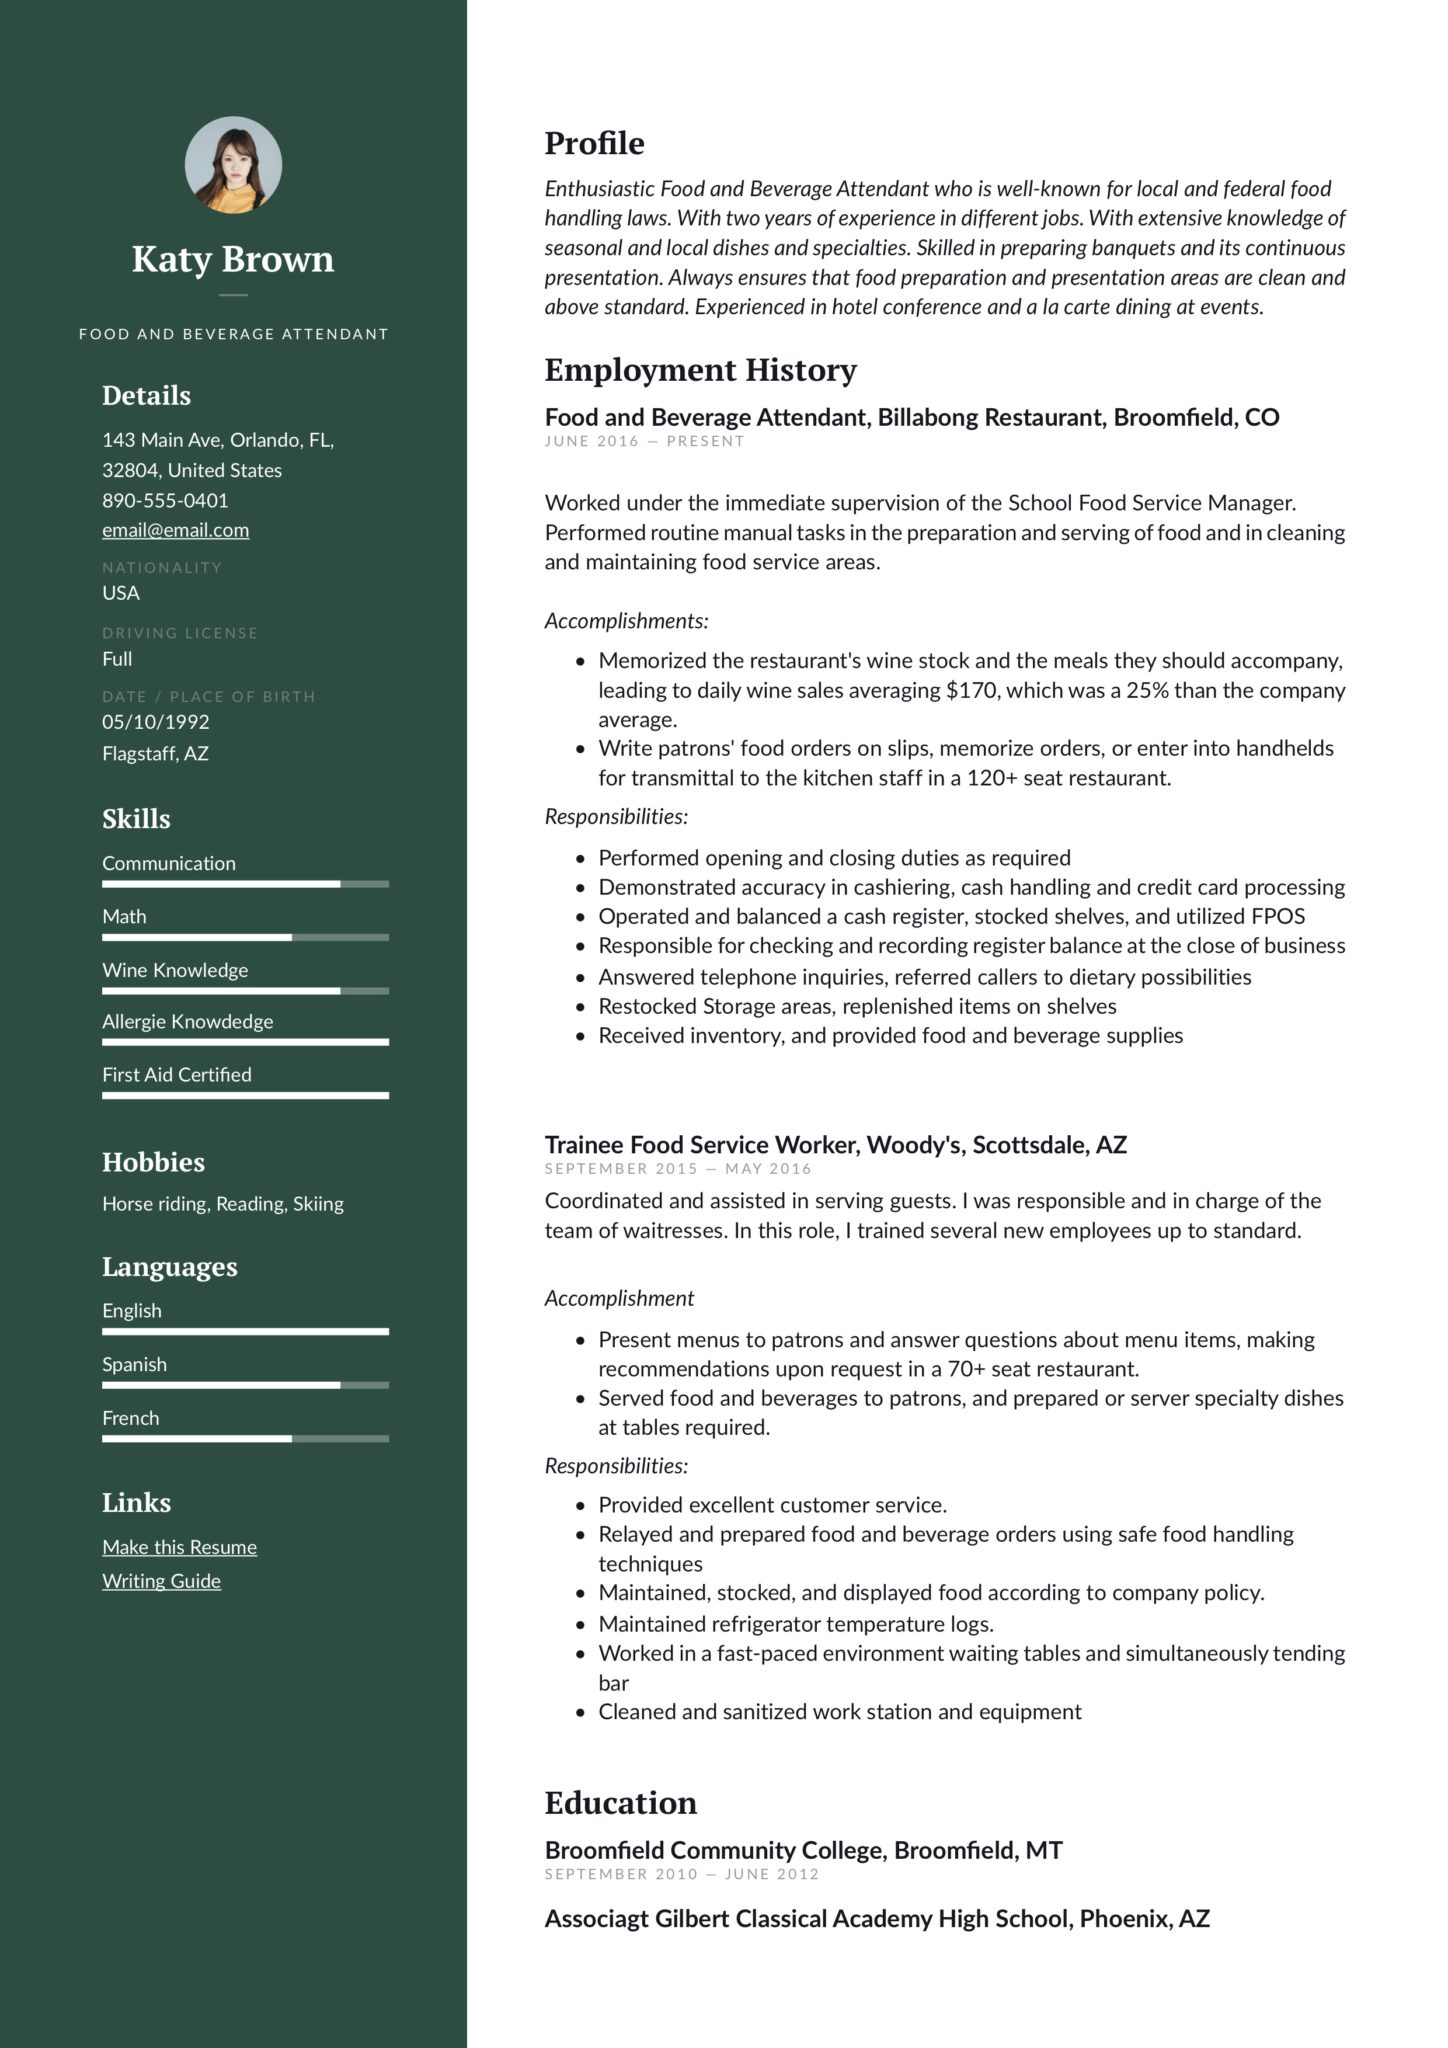 Green example resume food and beverage attendant